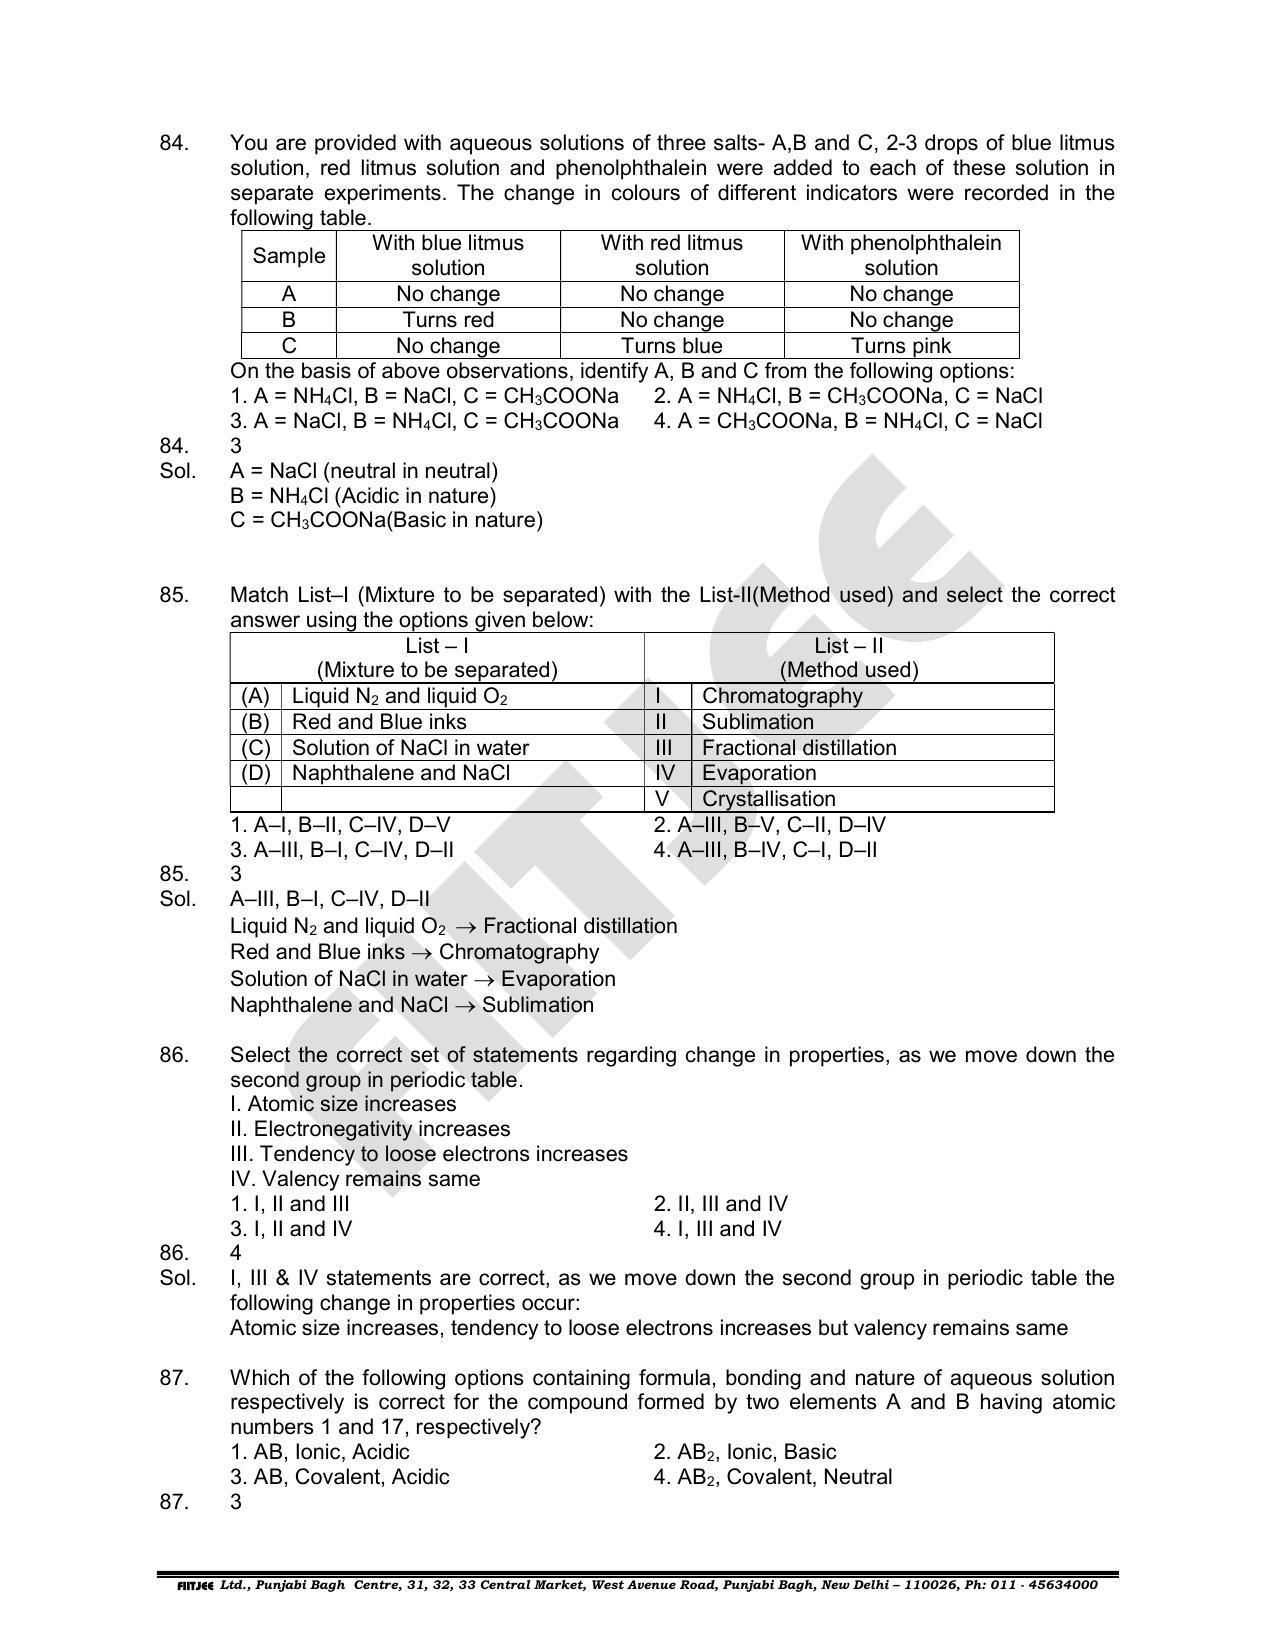 NTSE 2019 (Stage II) SAT Paper with Solution (June 16, 2019) - Page 27